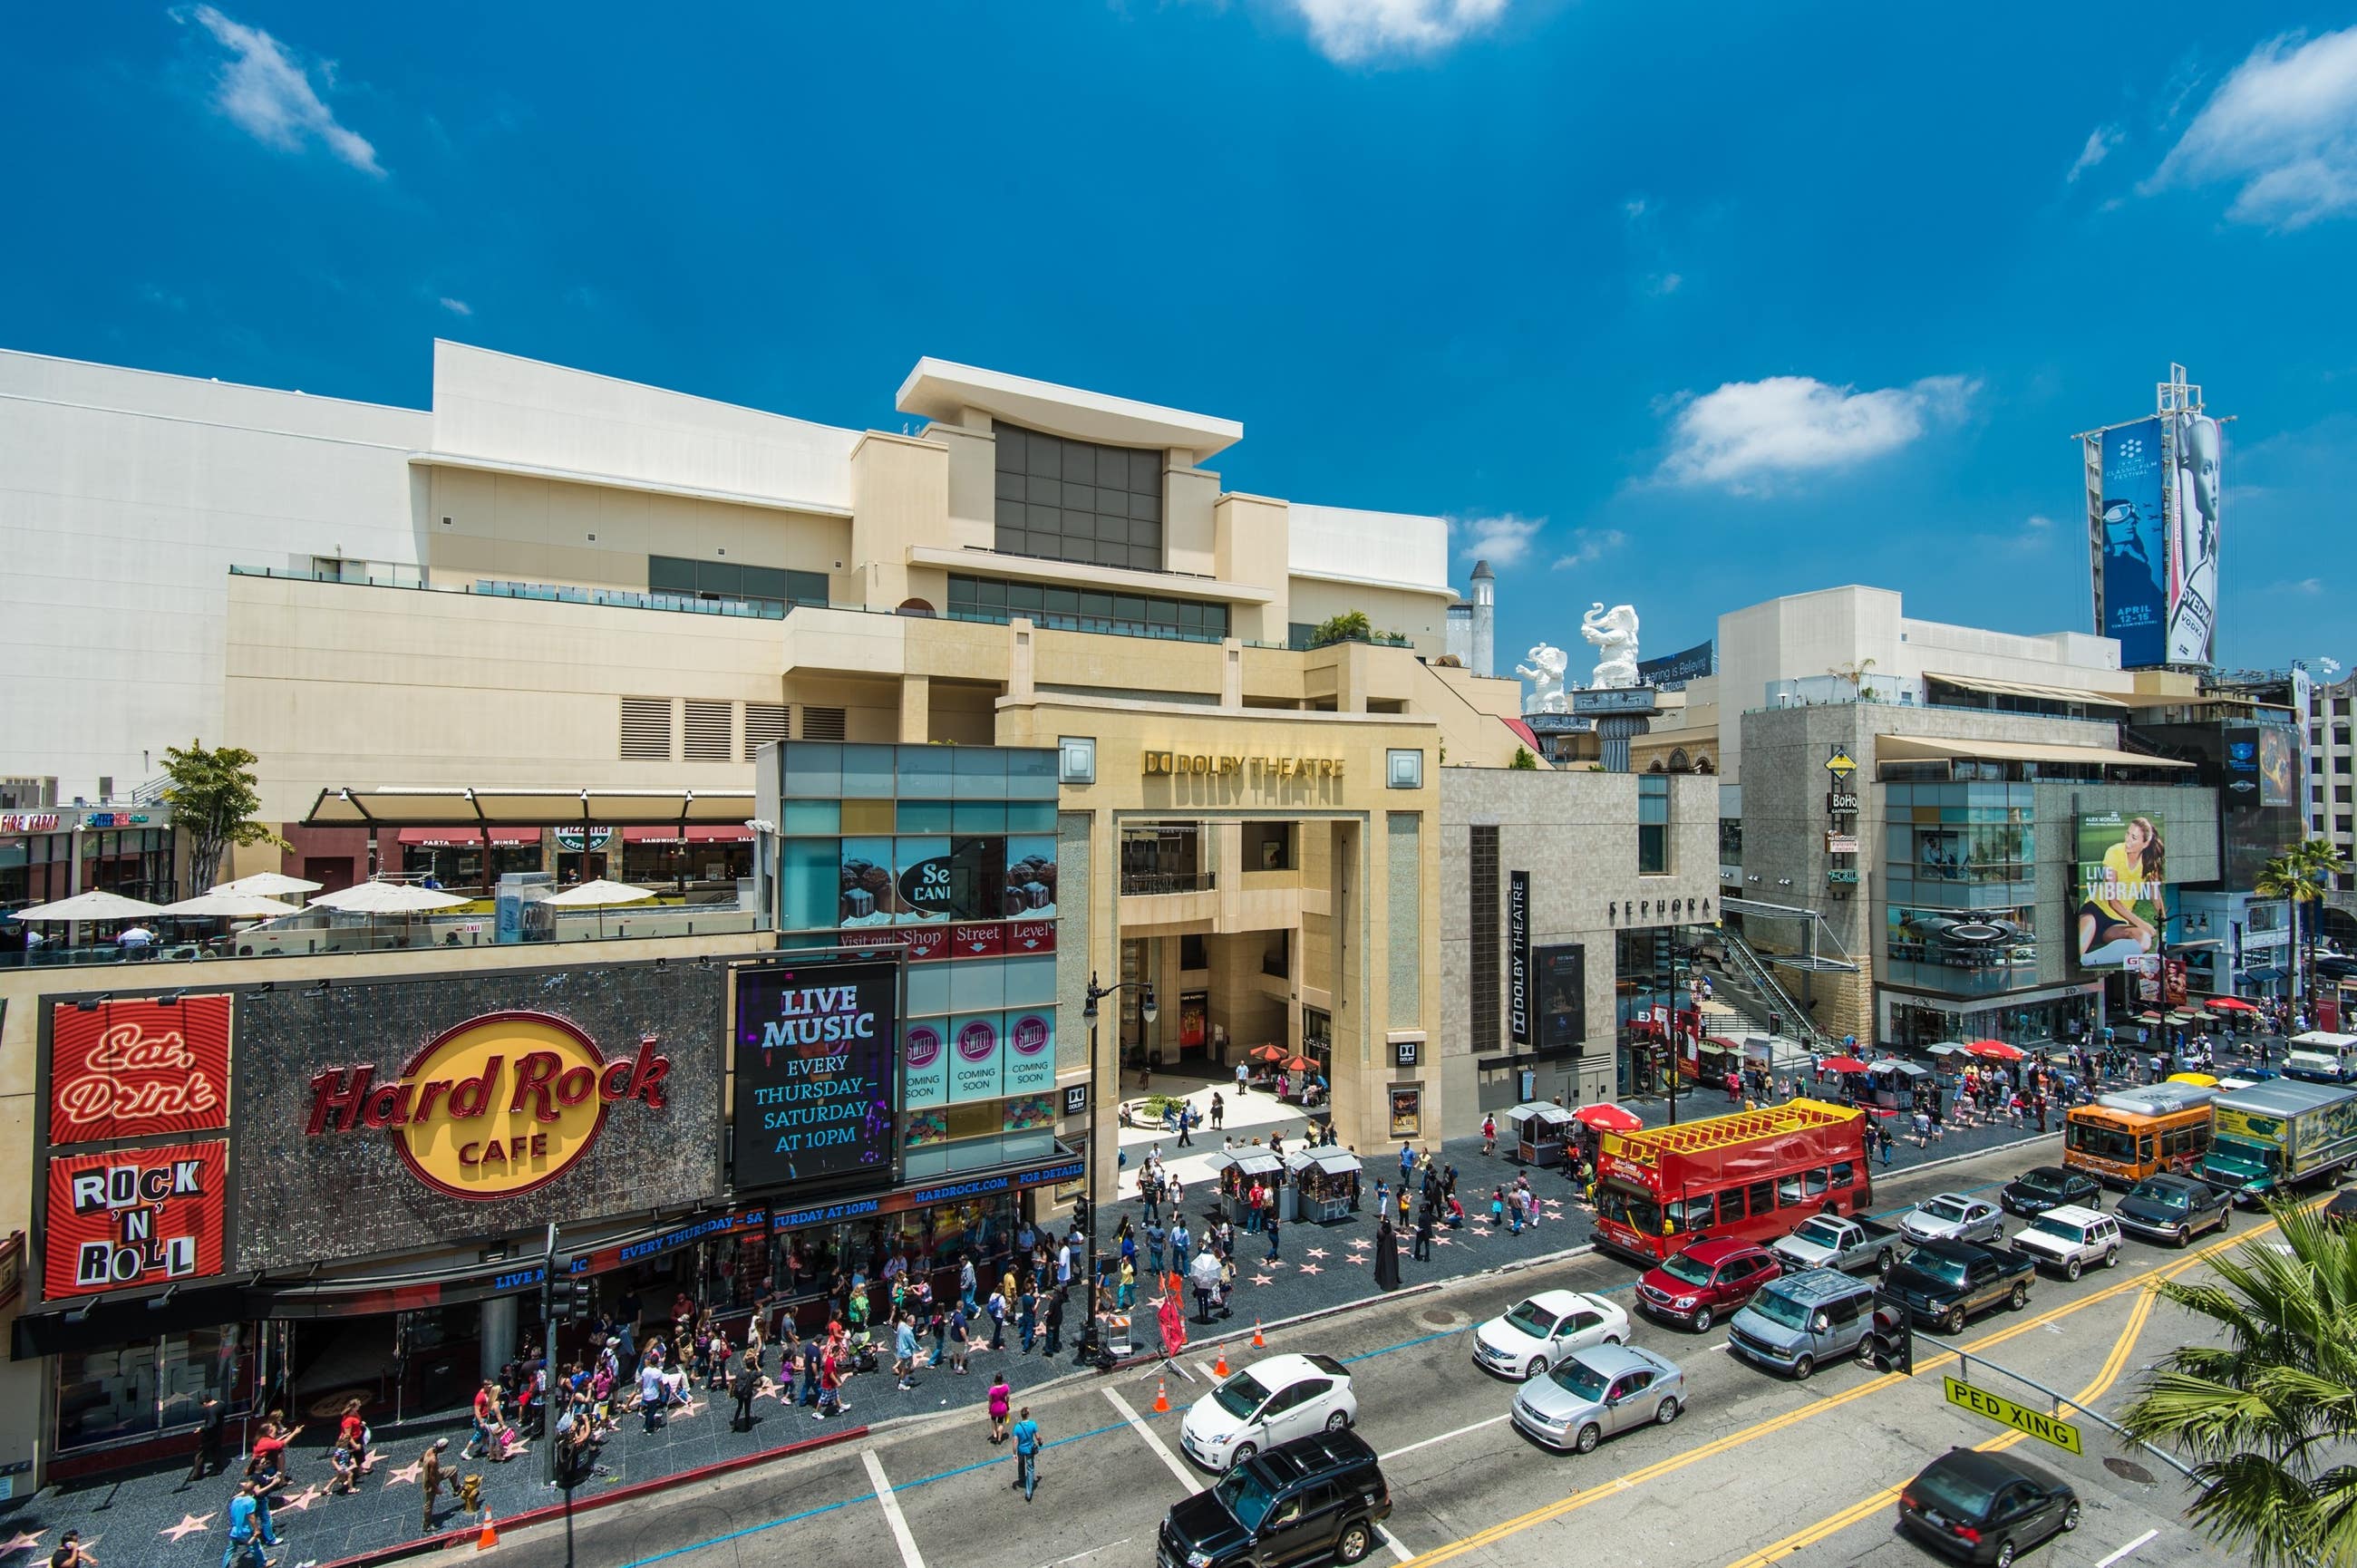 Hollywood & Highland from Hollywood Blvd/Walk of Fame